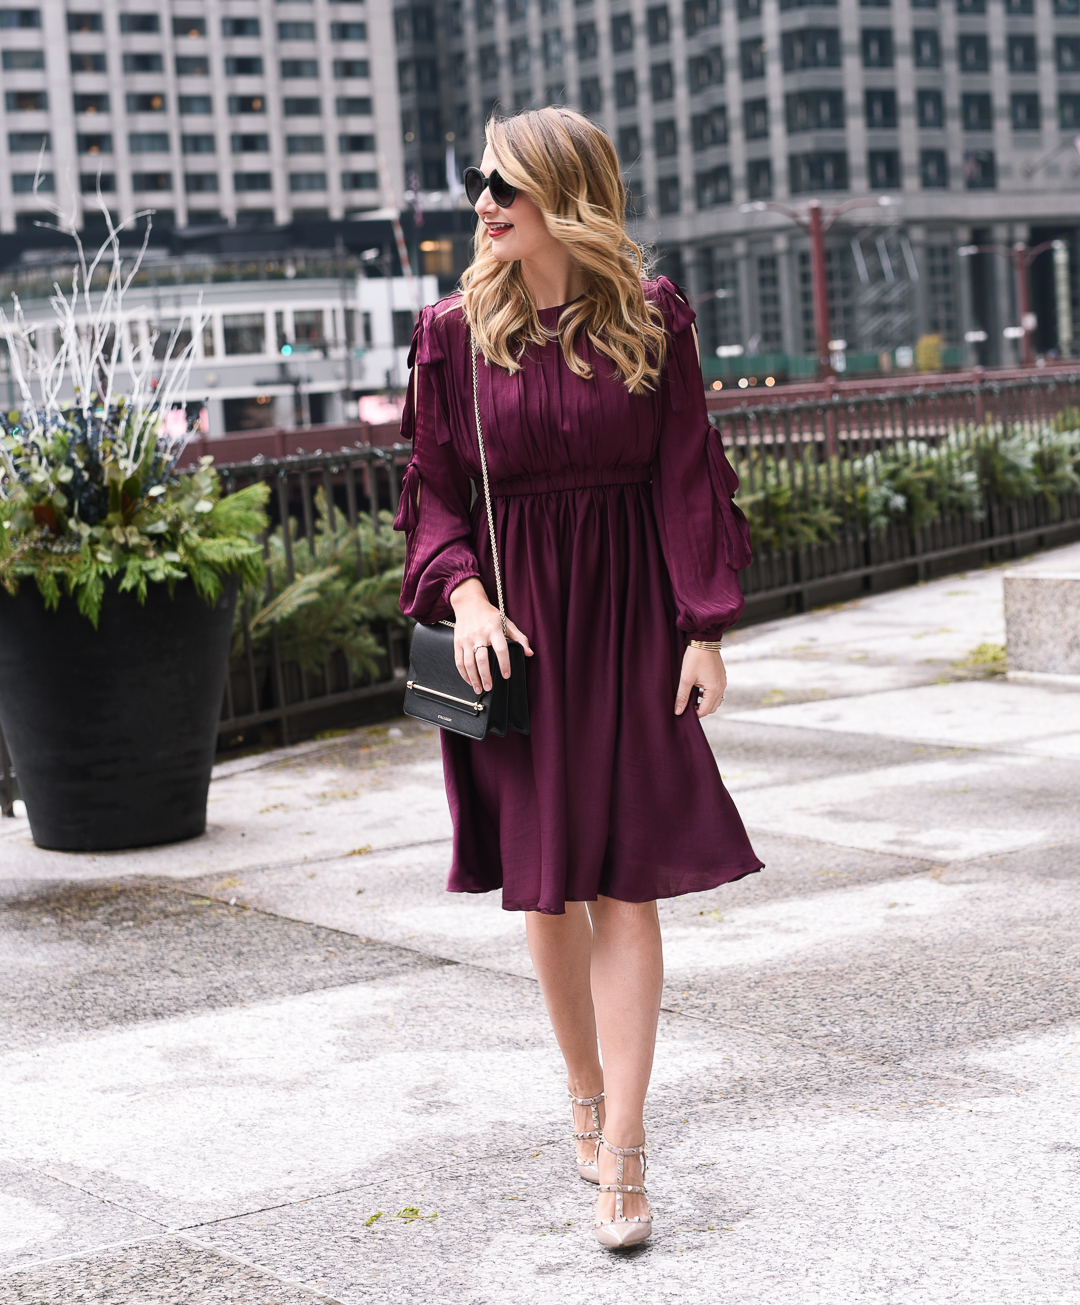 beige valentino rockstud pumps - Burgundy Holiday Dress by Chicago fashion blogger Visions of Vogue